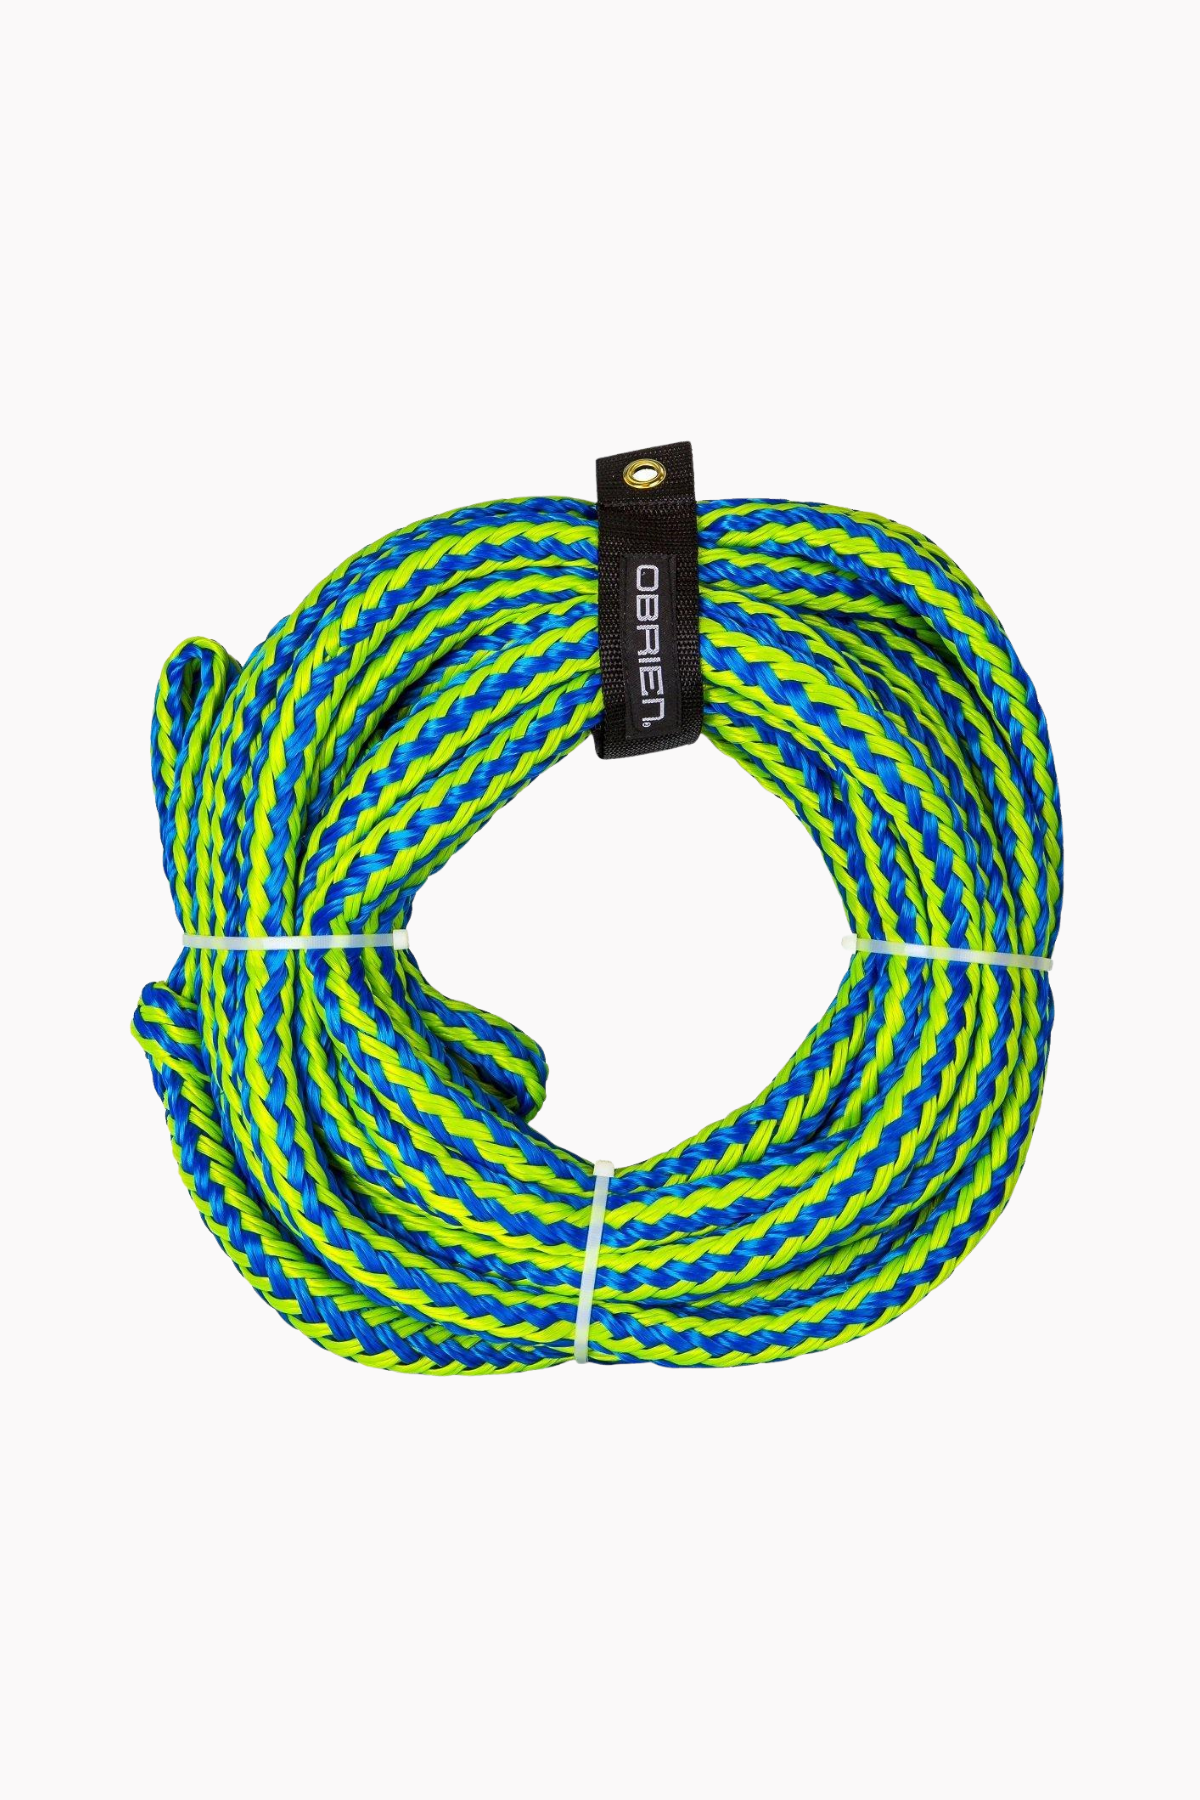 OBRIEN 6 PERSON TOW ROPE • Page 11 of 26 • COTTAGE TOYS ONLINE